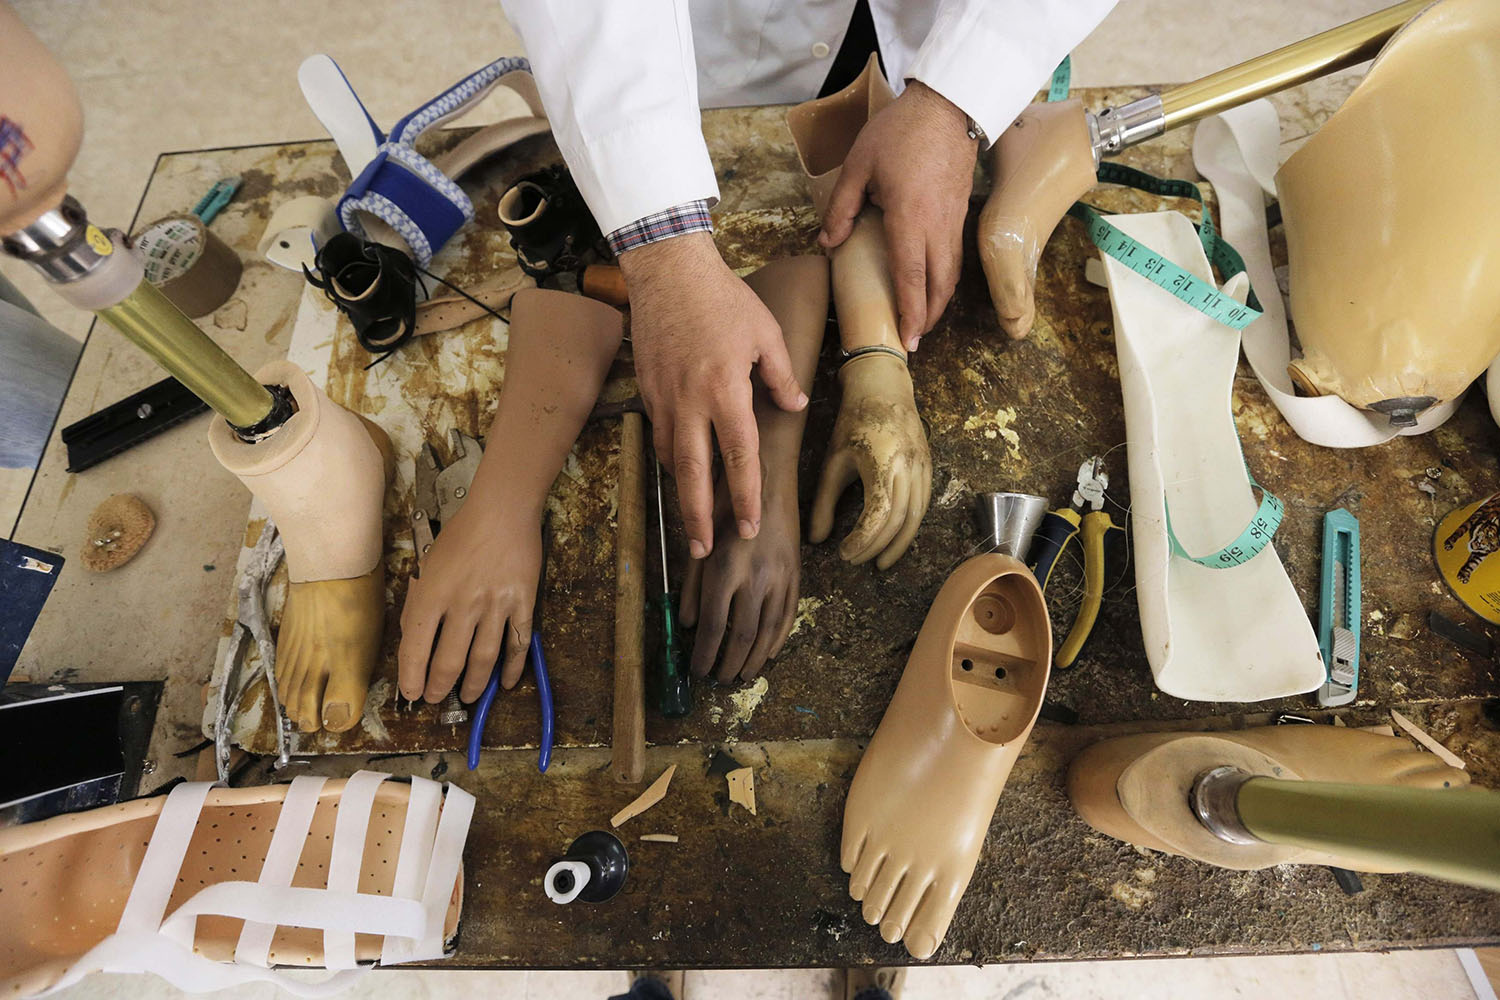 A Palestinian technician works at a small factory that produces artificial limbs in Qalqilya